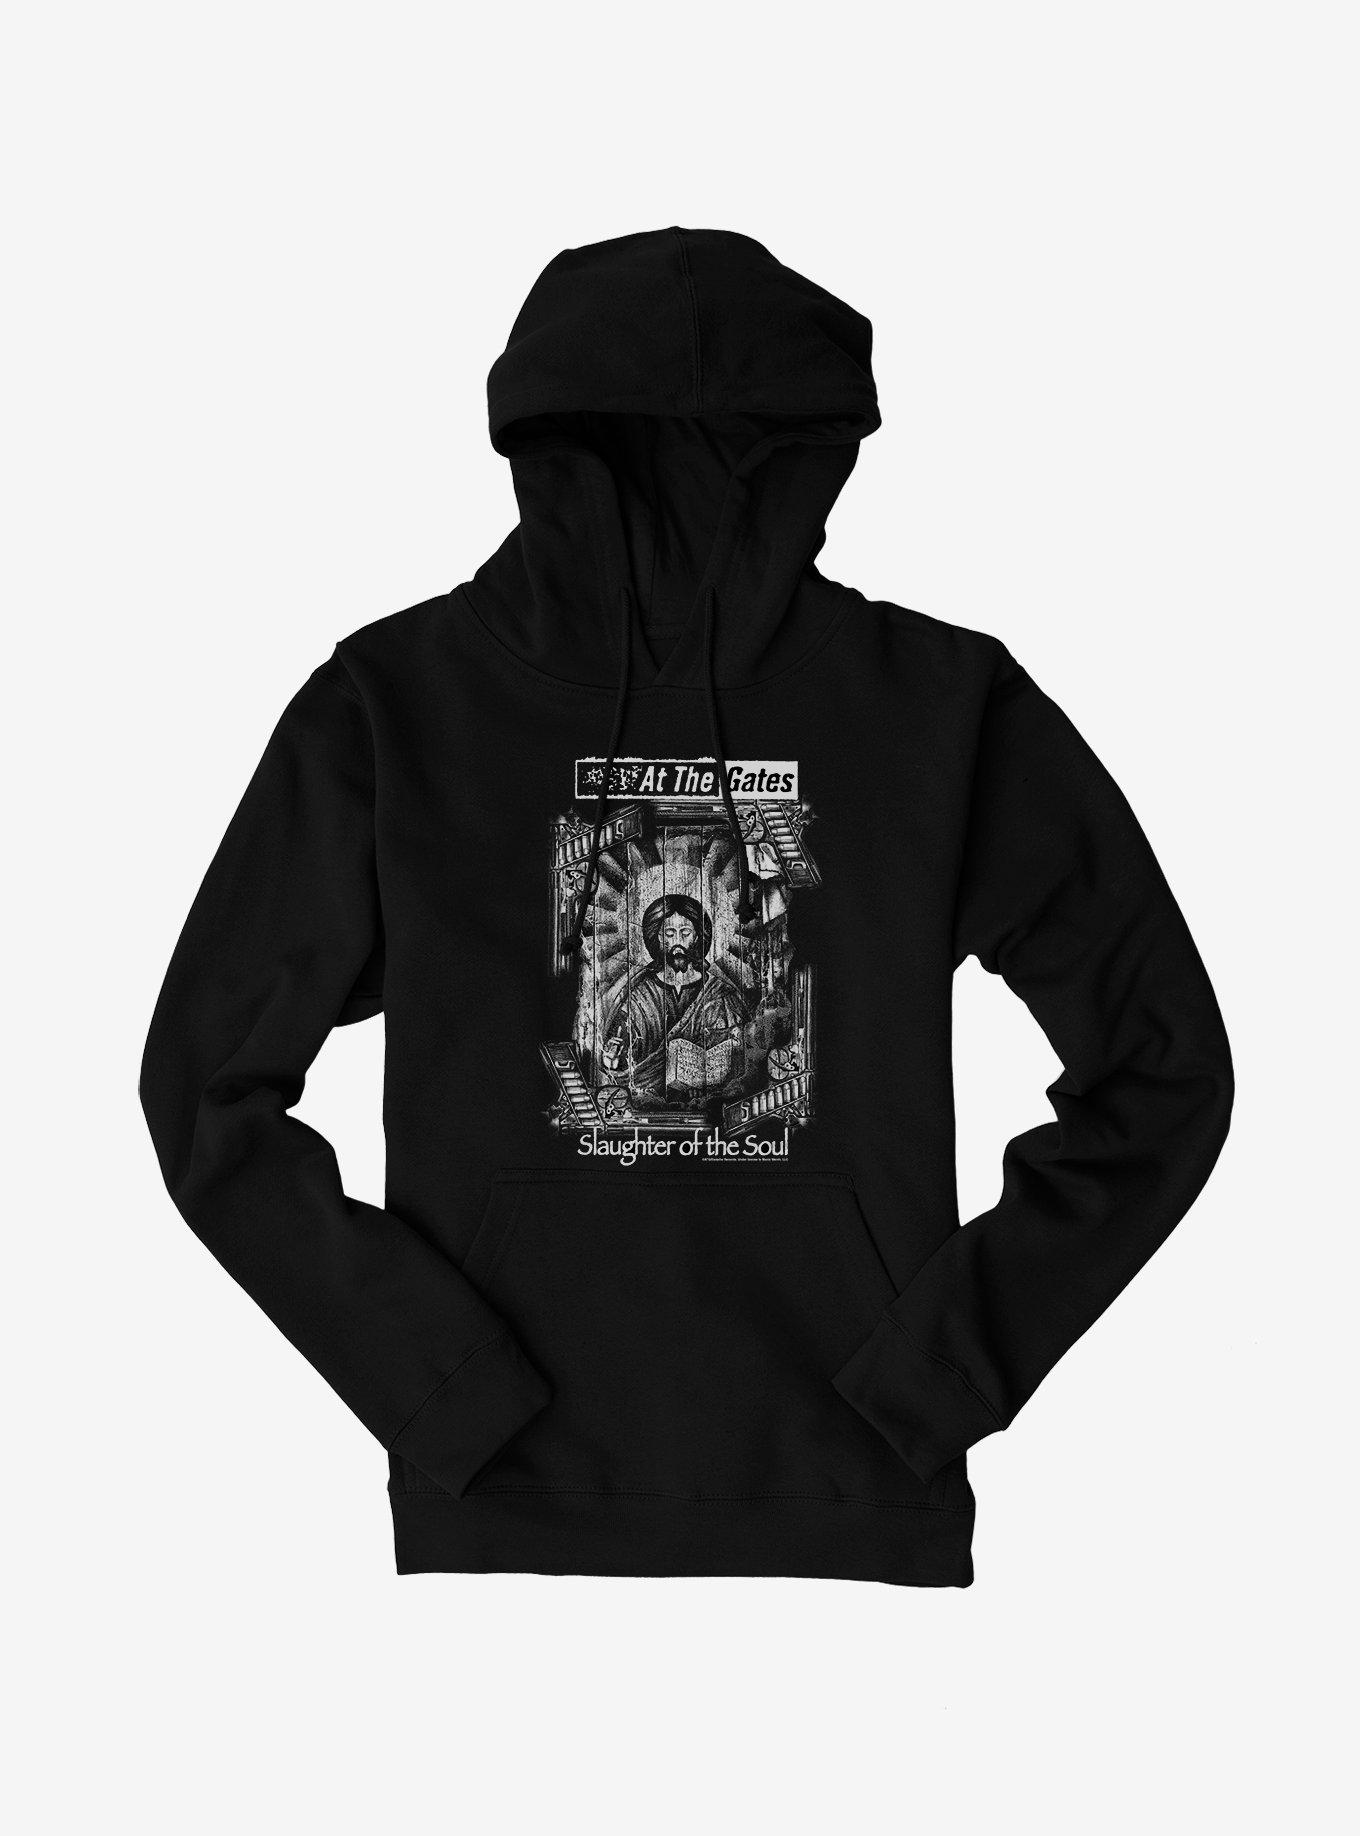 At The Gates Slaughter Of The Soul Hoodie, BLACK, hi-res